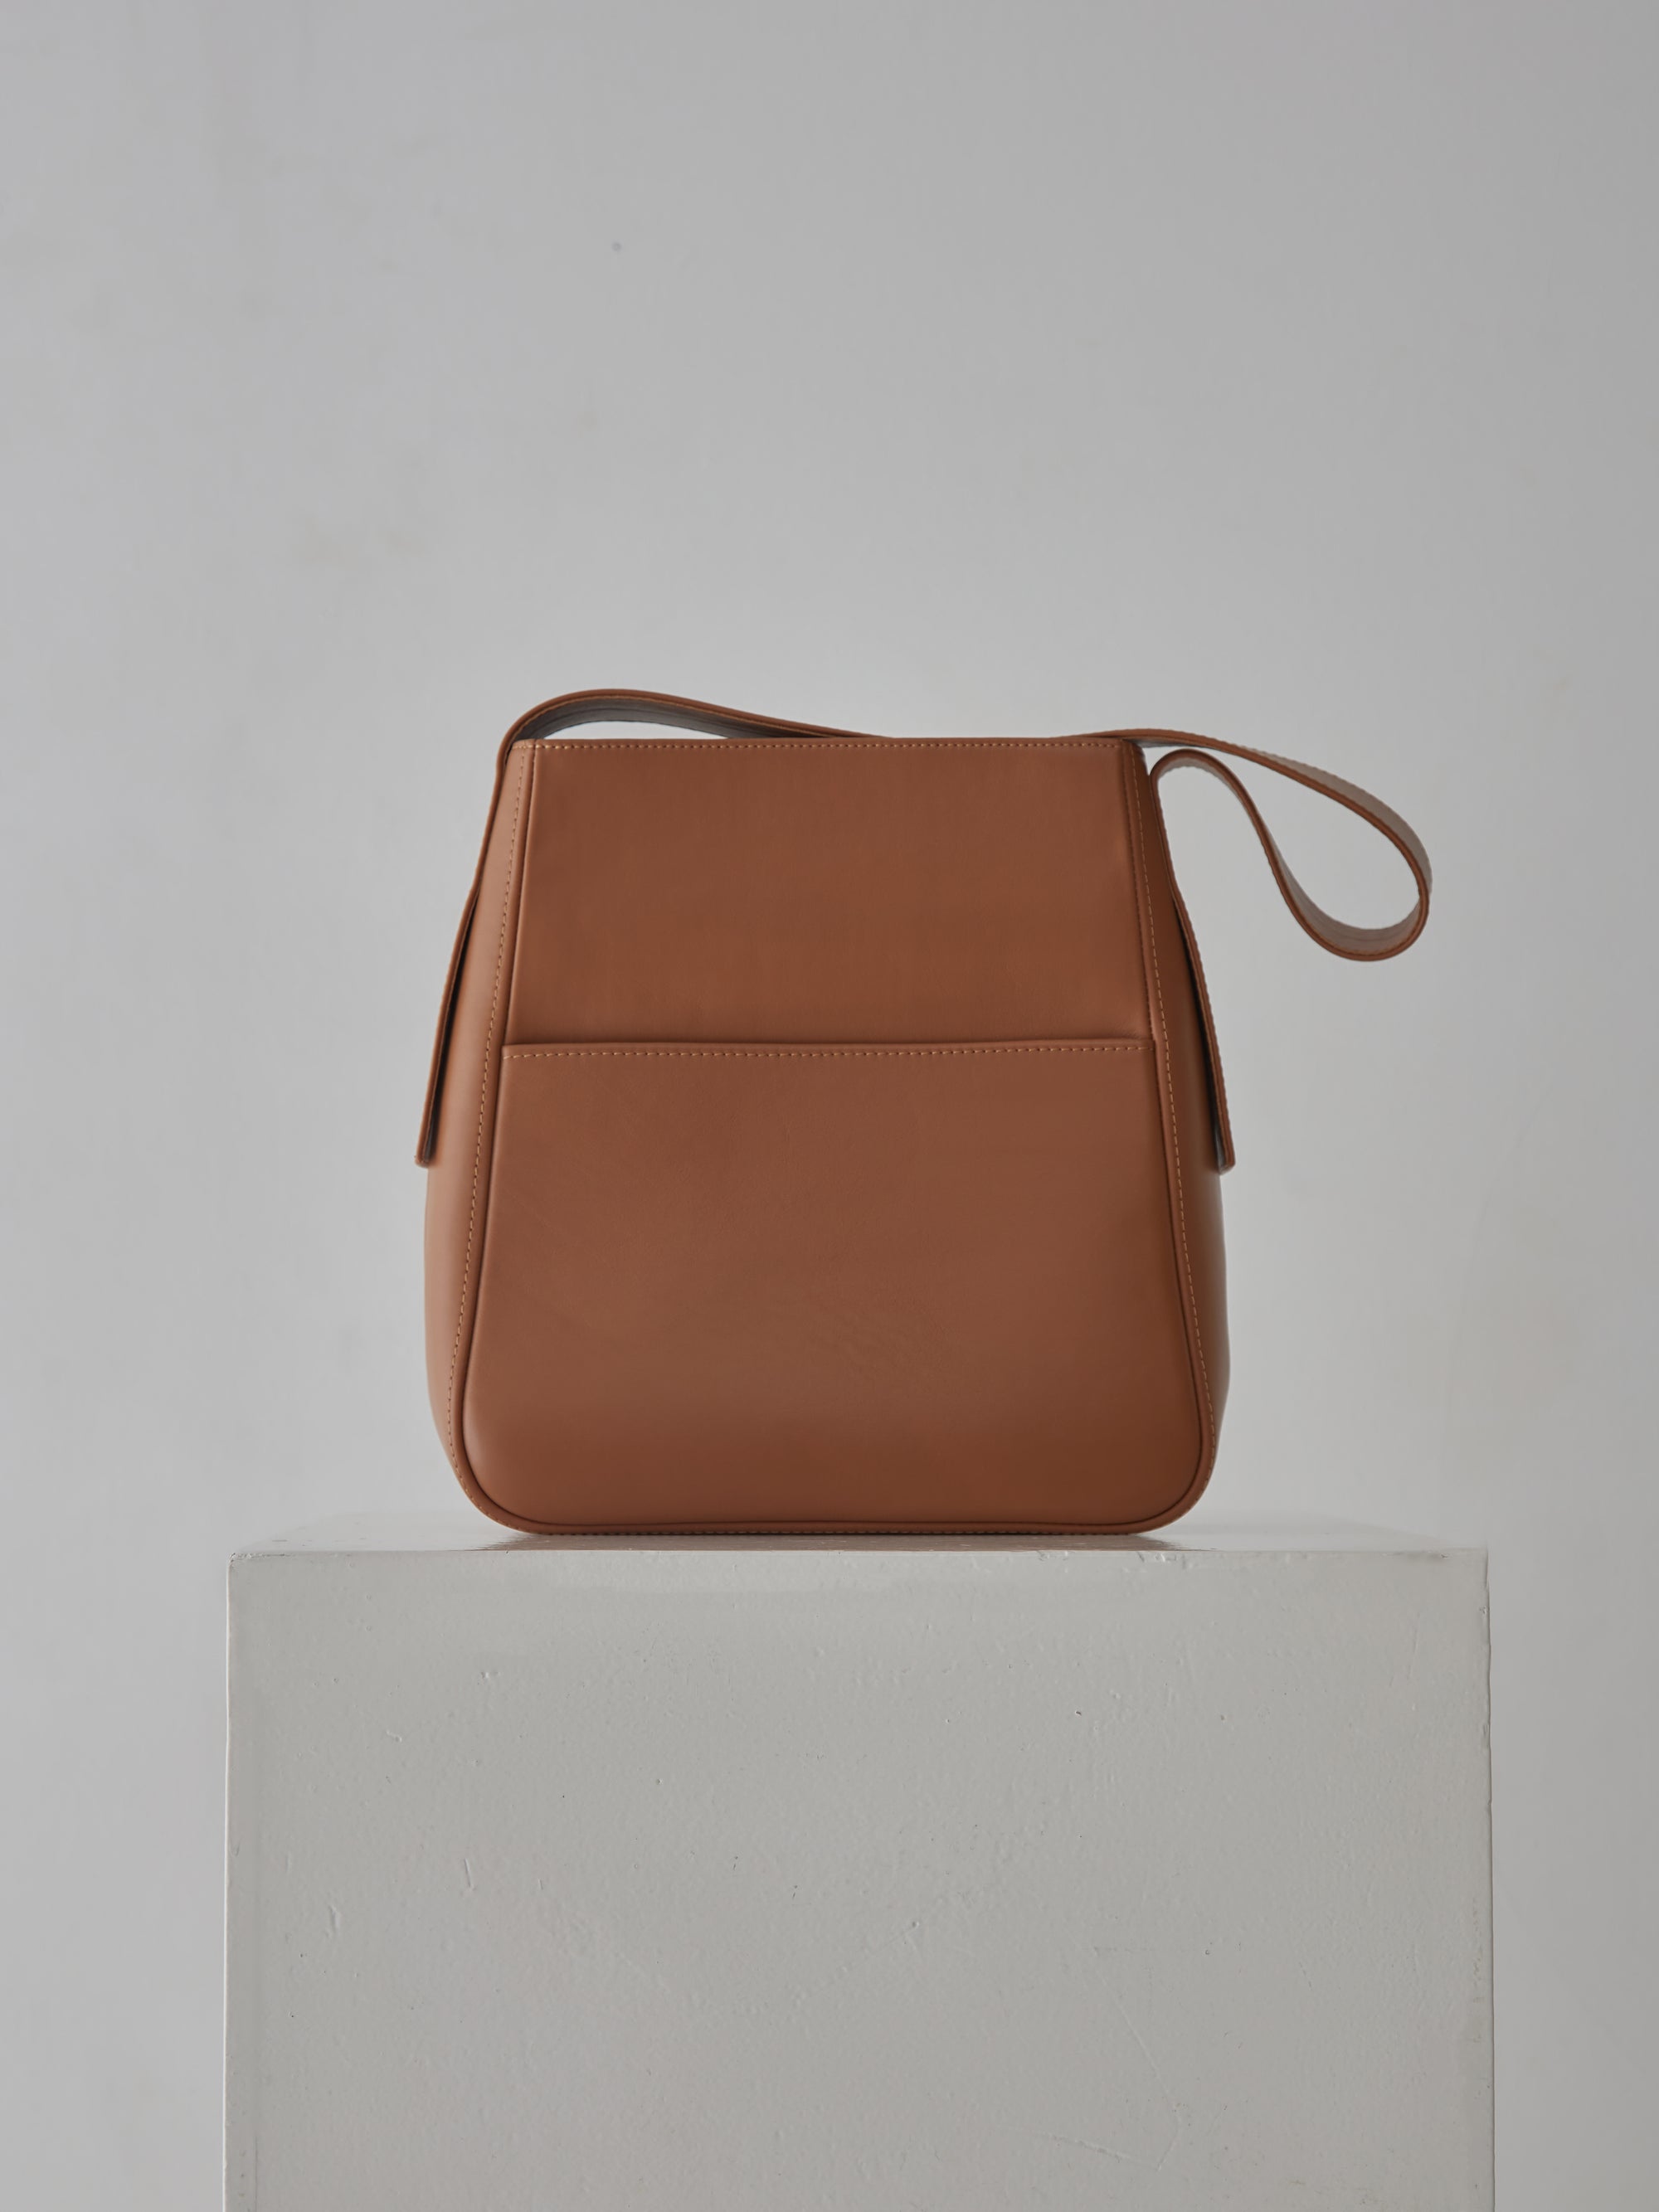 brown leather bag by laura zacs